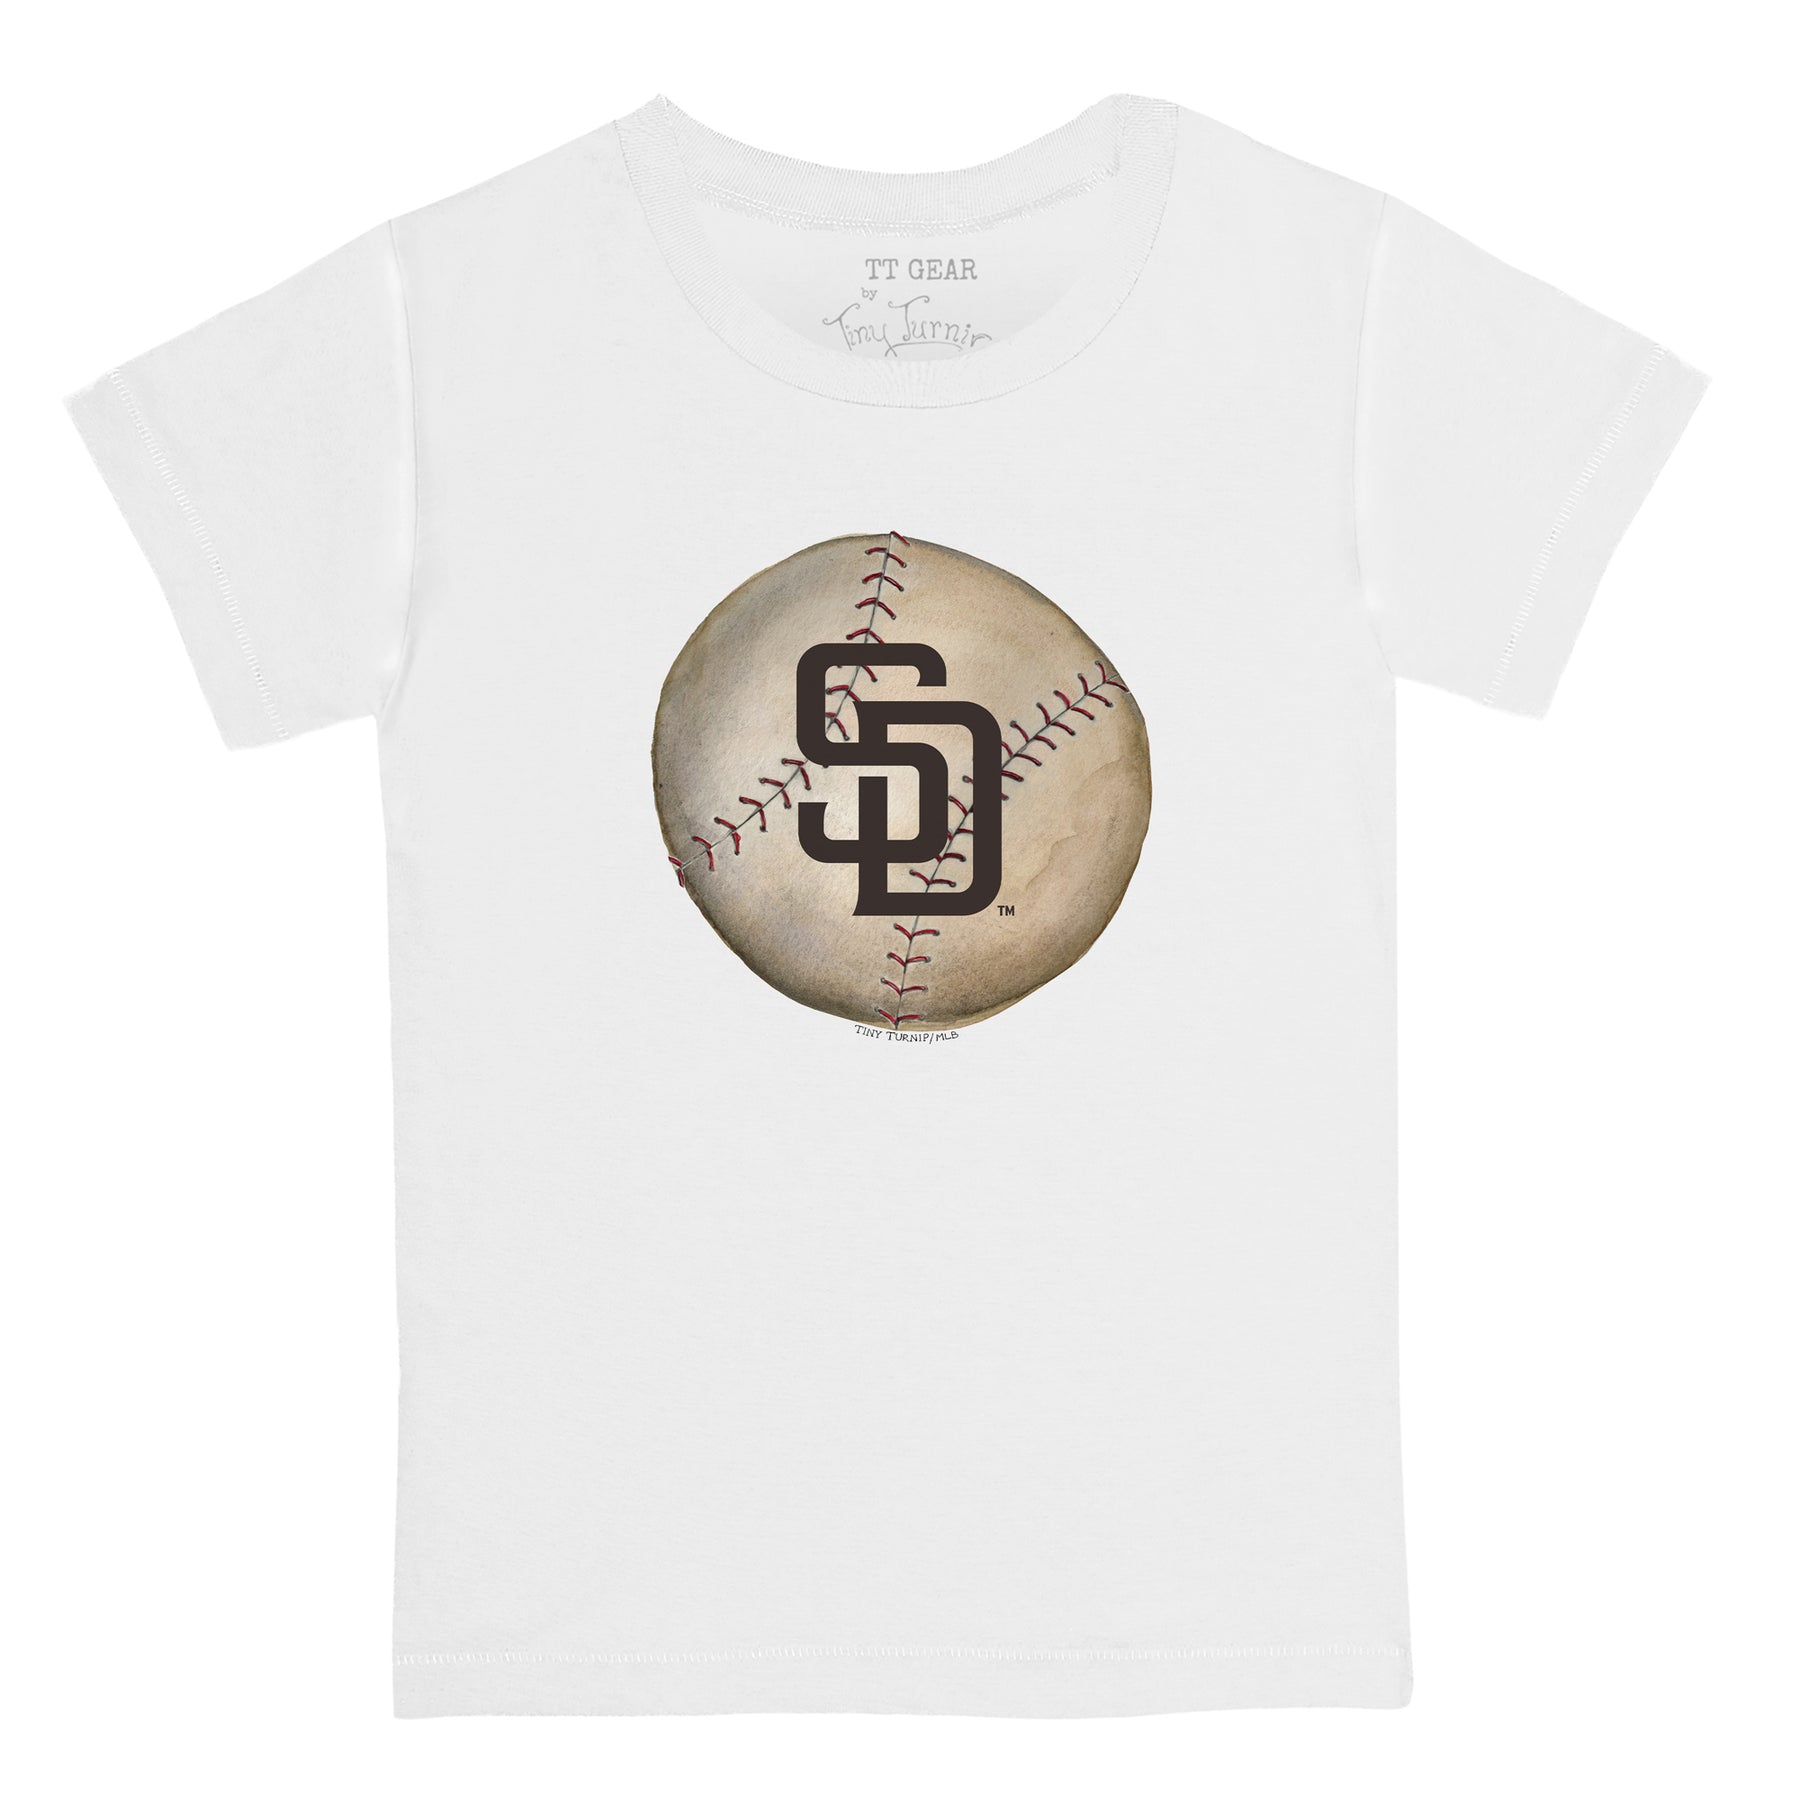 San Diego Padres Stitched Baseball Tee Shirt Youth Small (6-8) / White